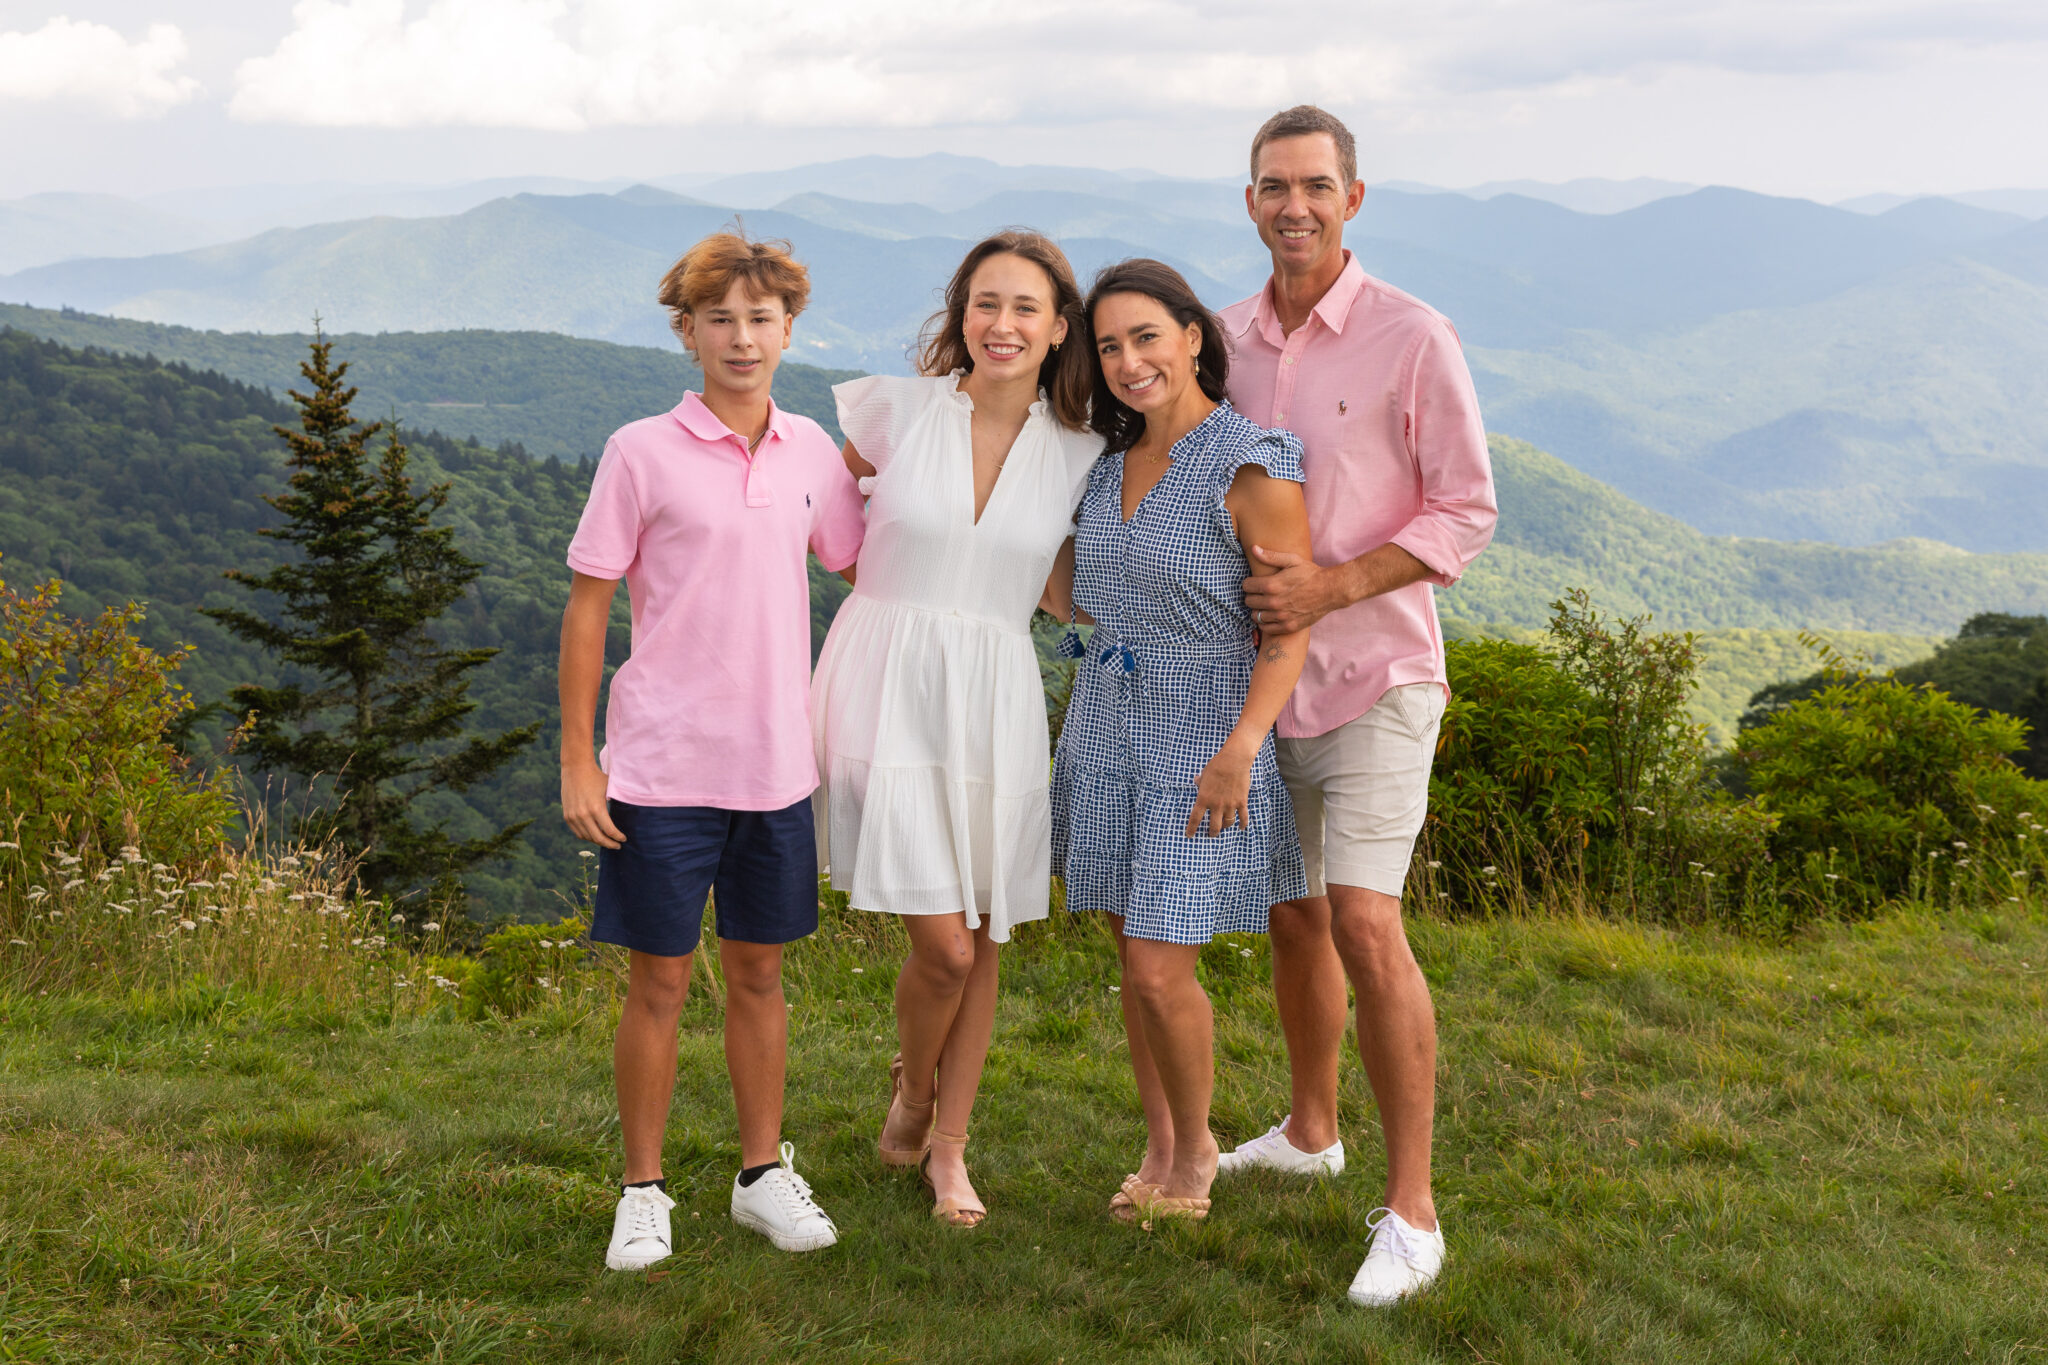 Asheville Family Portrait of 4 people standing in front of a mountain backdrop